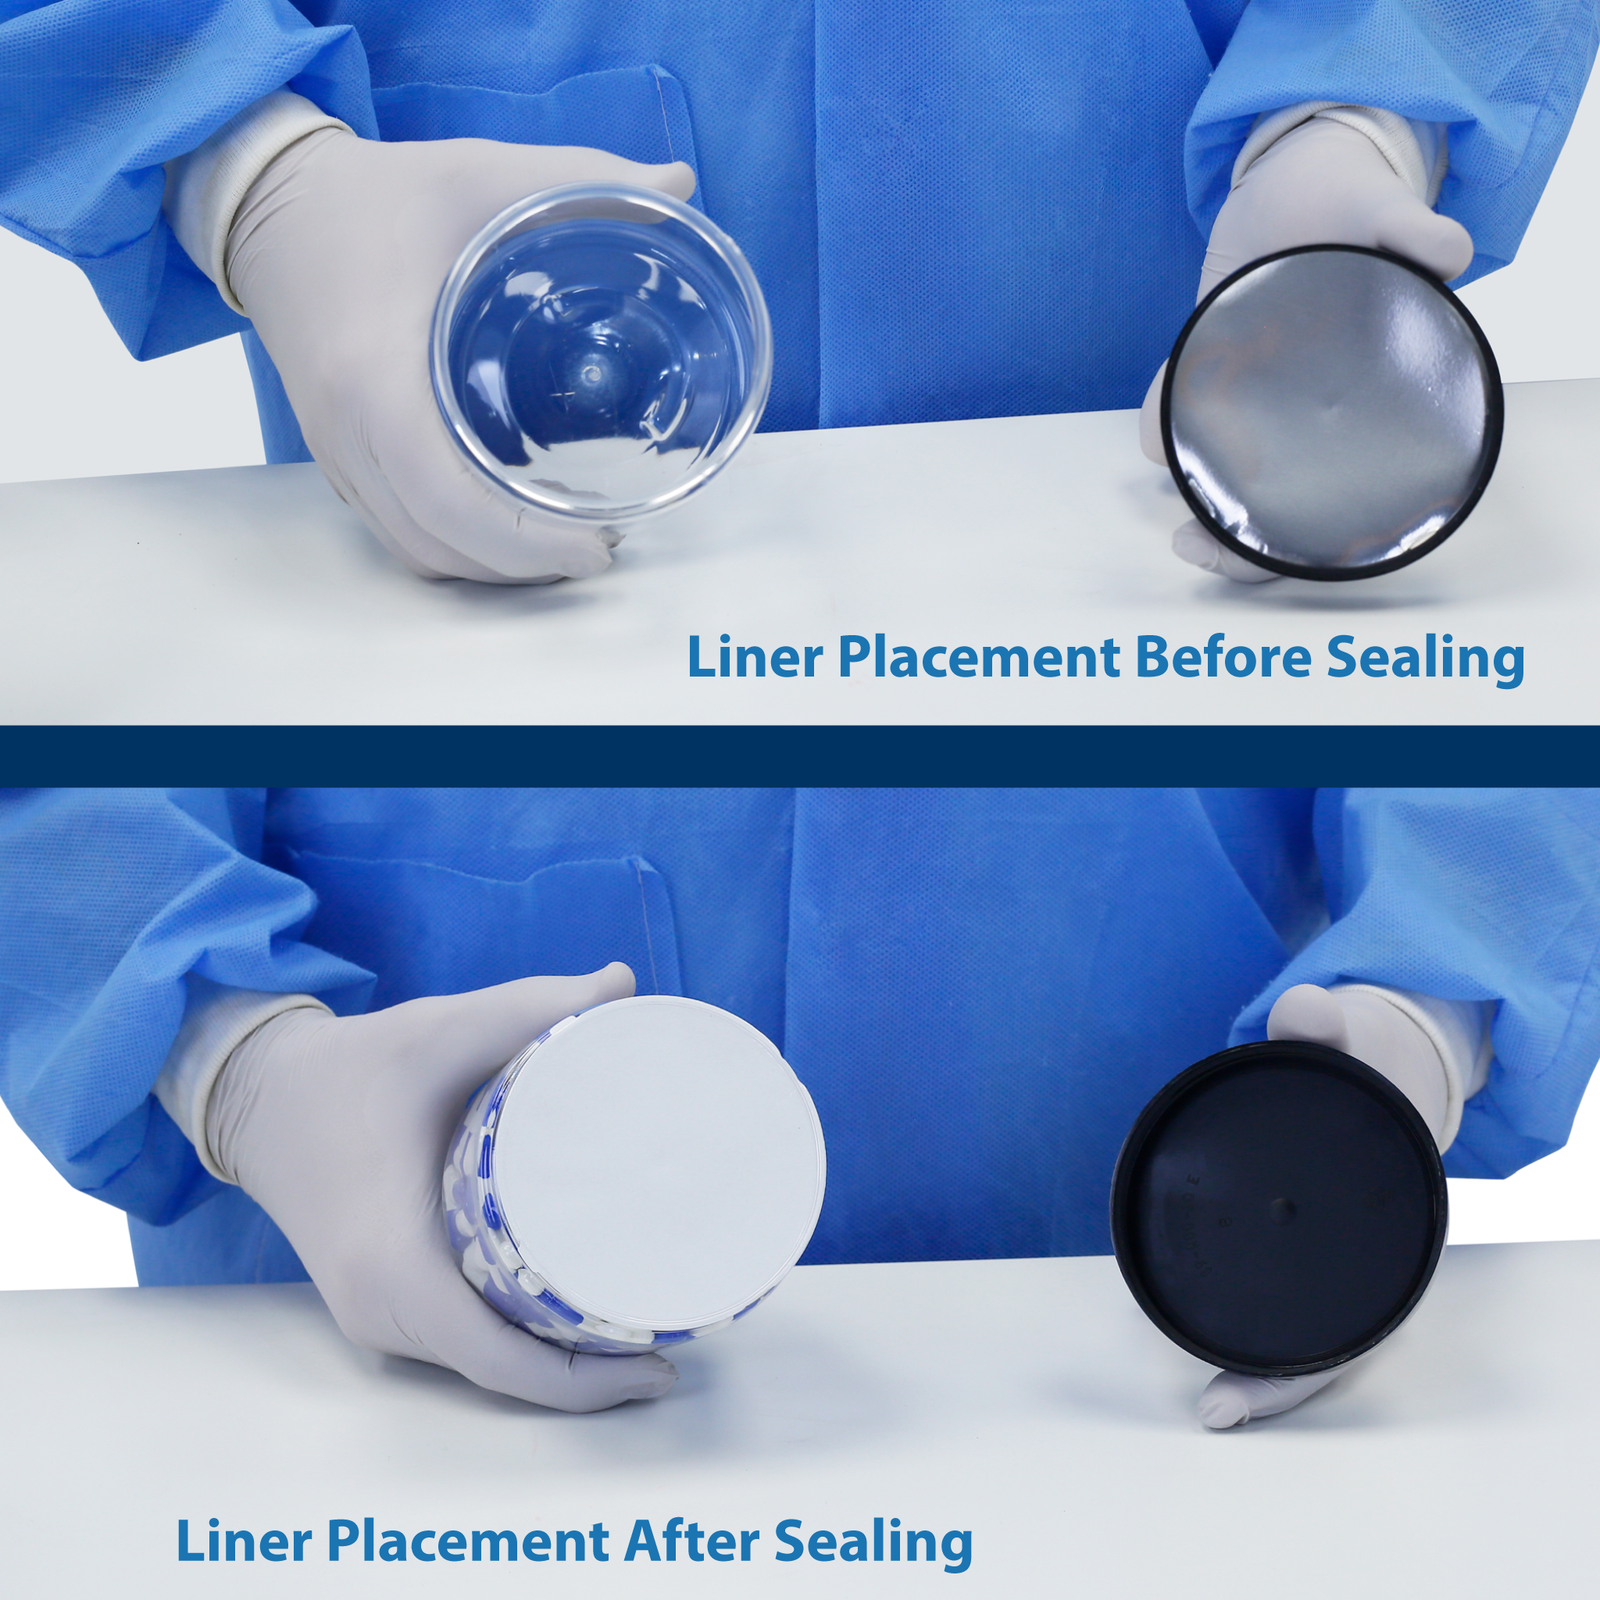 Correct placement of the induction liners before they are sealed and after they are sealed to the plastic container